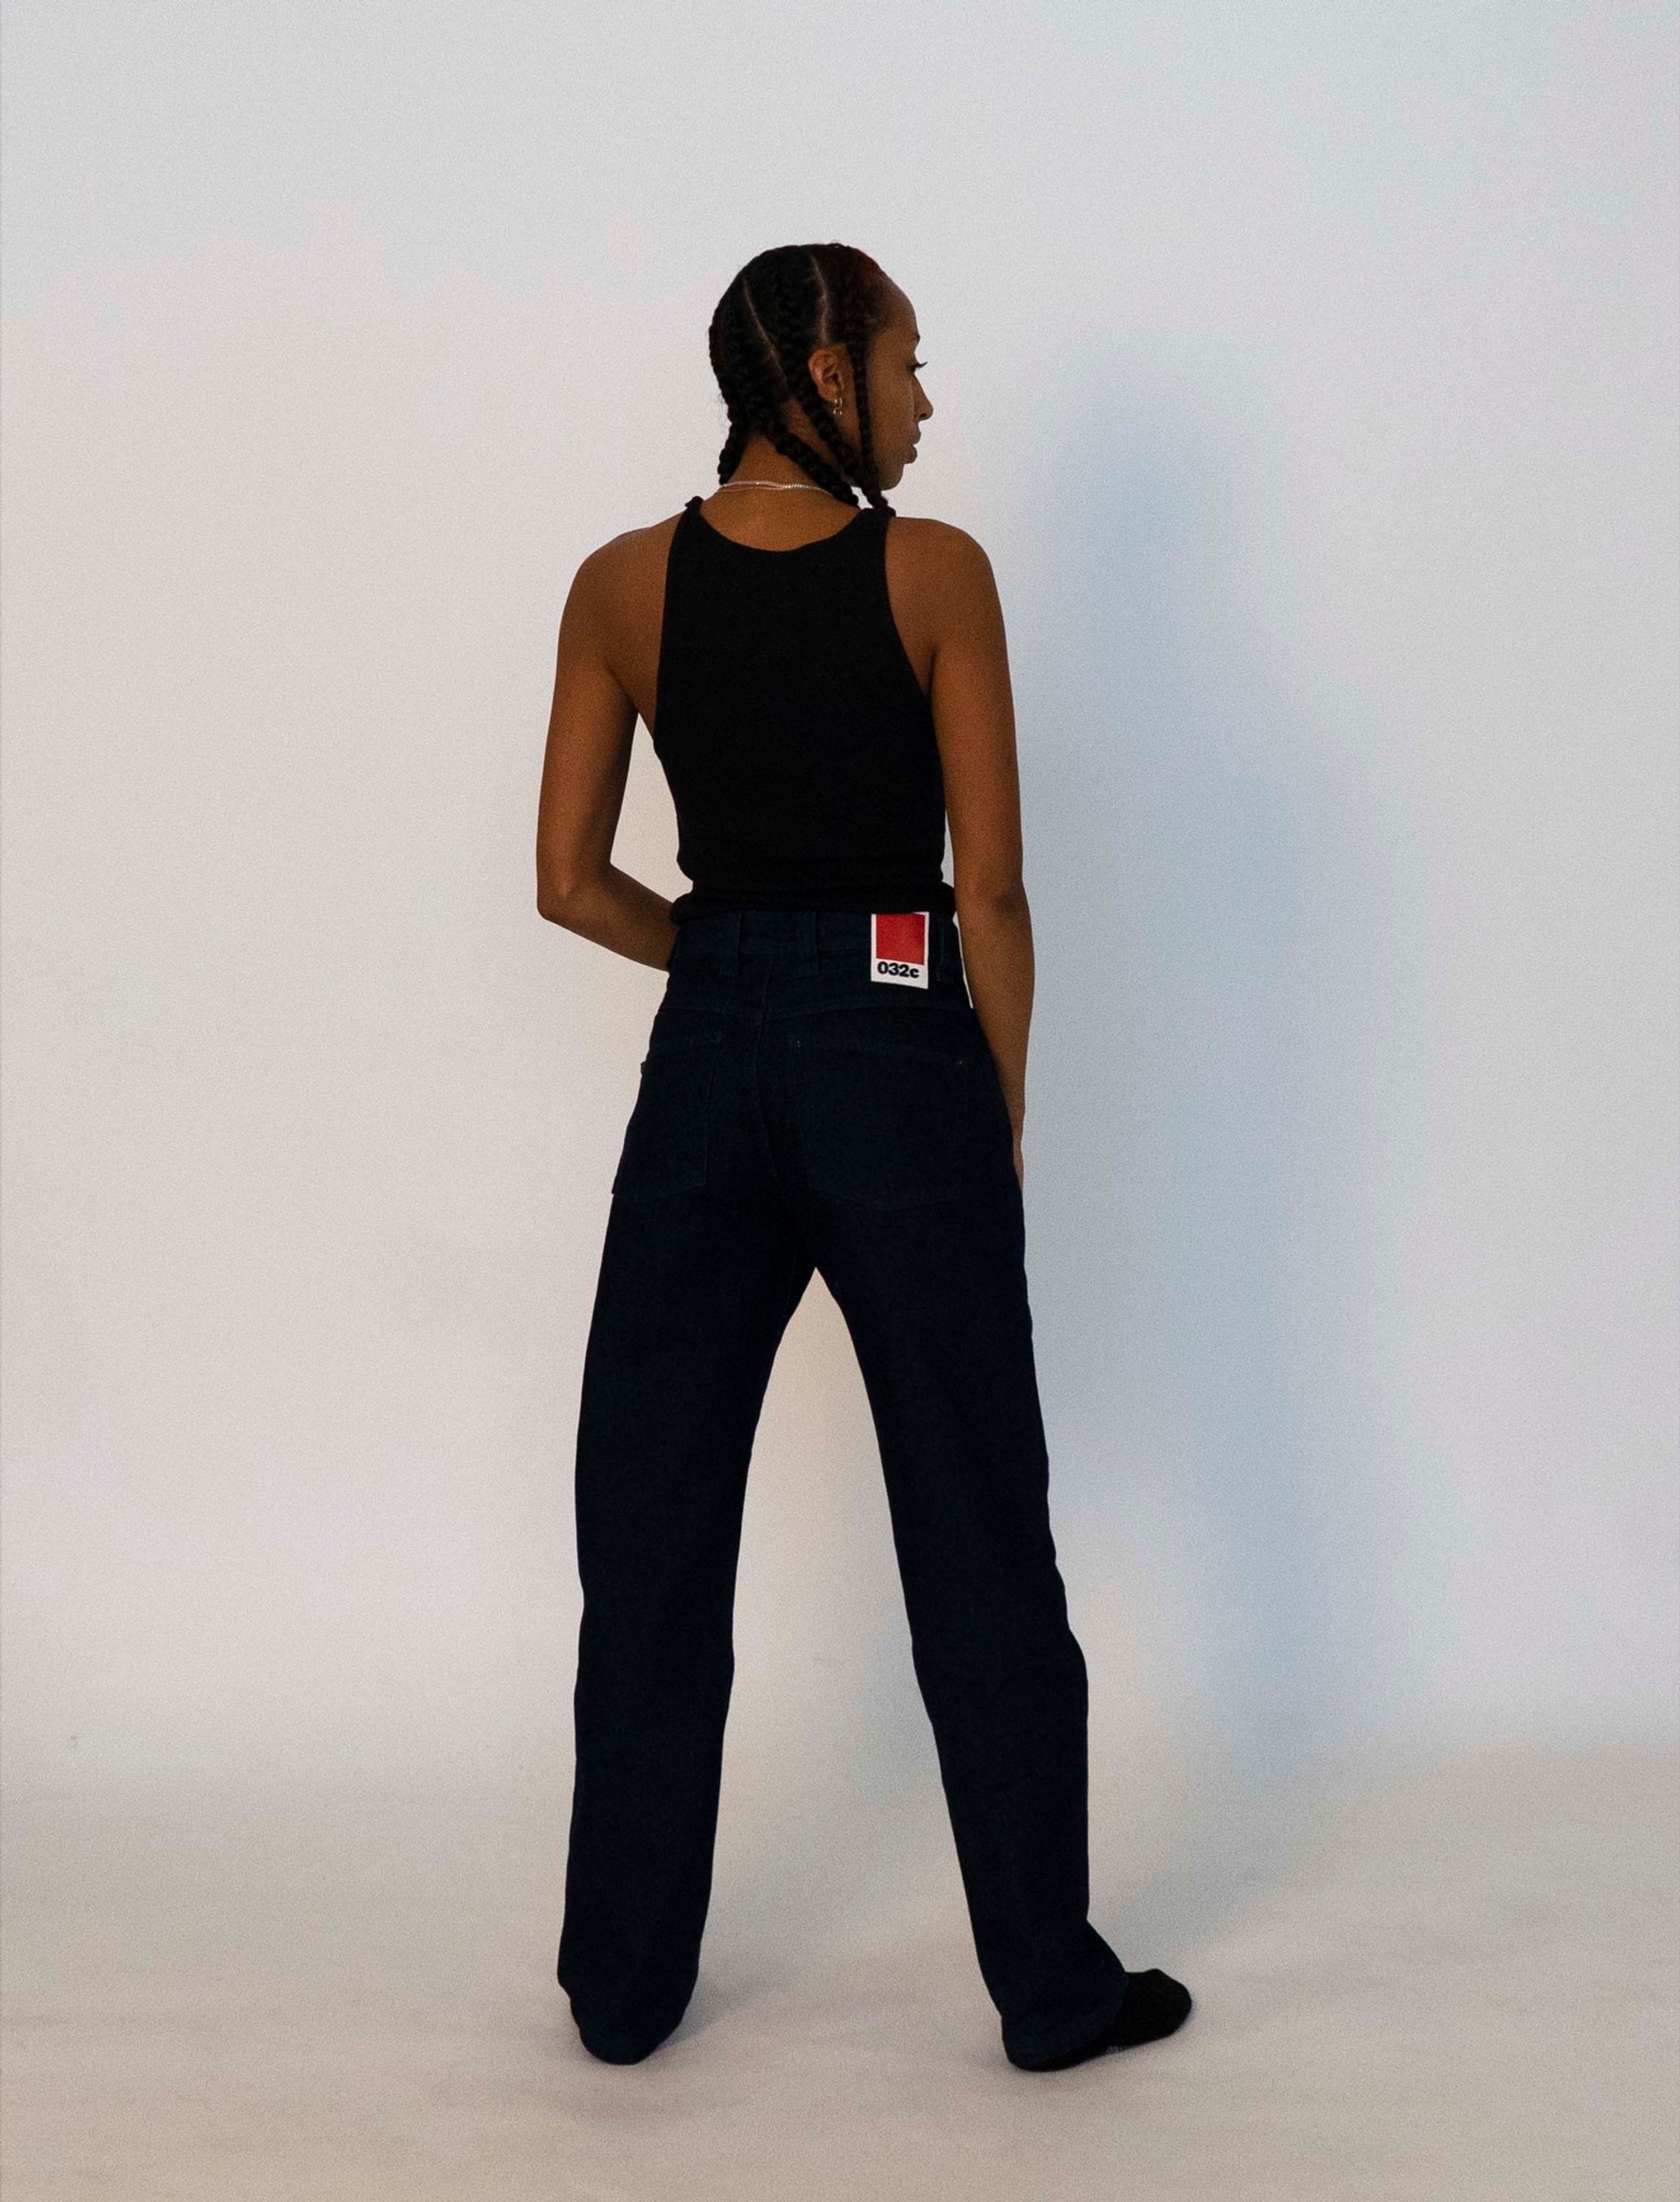 Libell wears the 032c LoveSexDreams ribbed tank in black, and the "next" jeans in dark blue